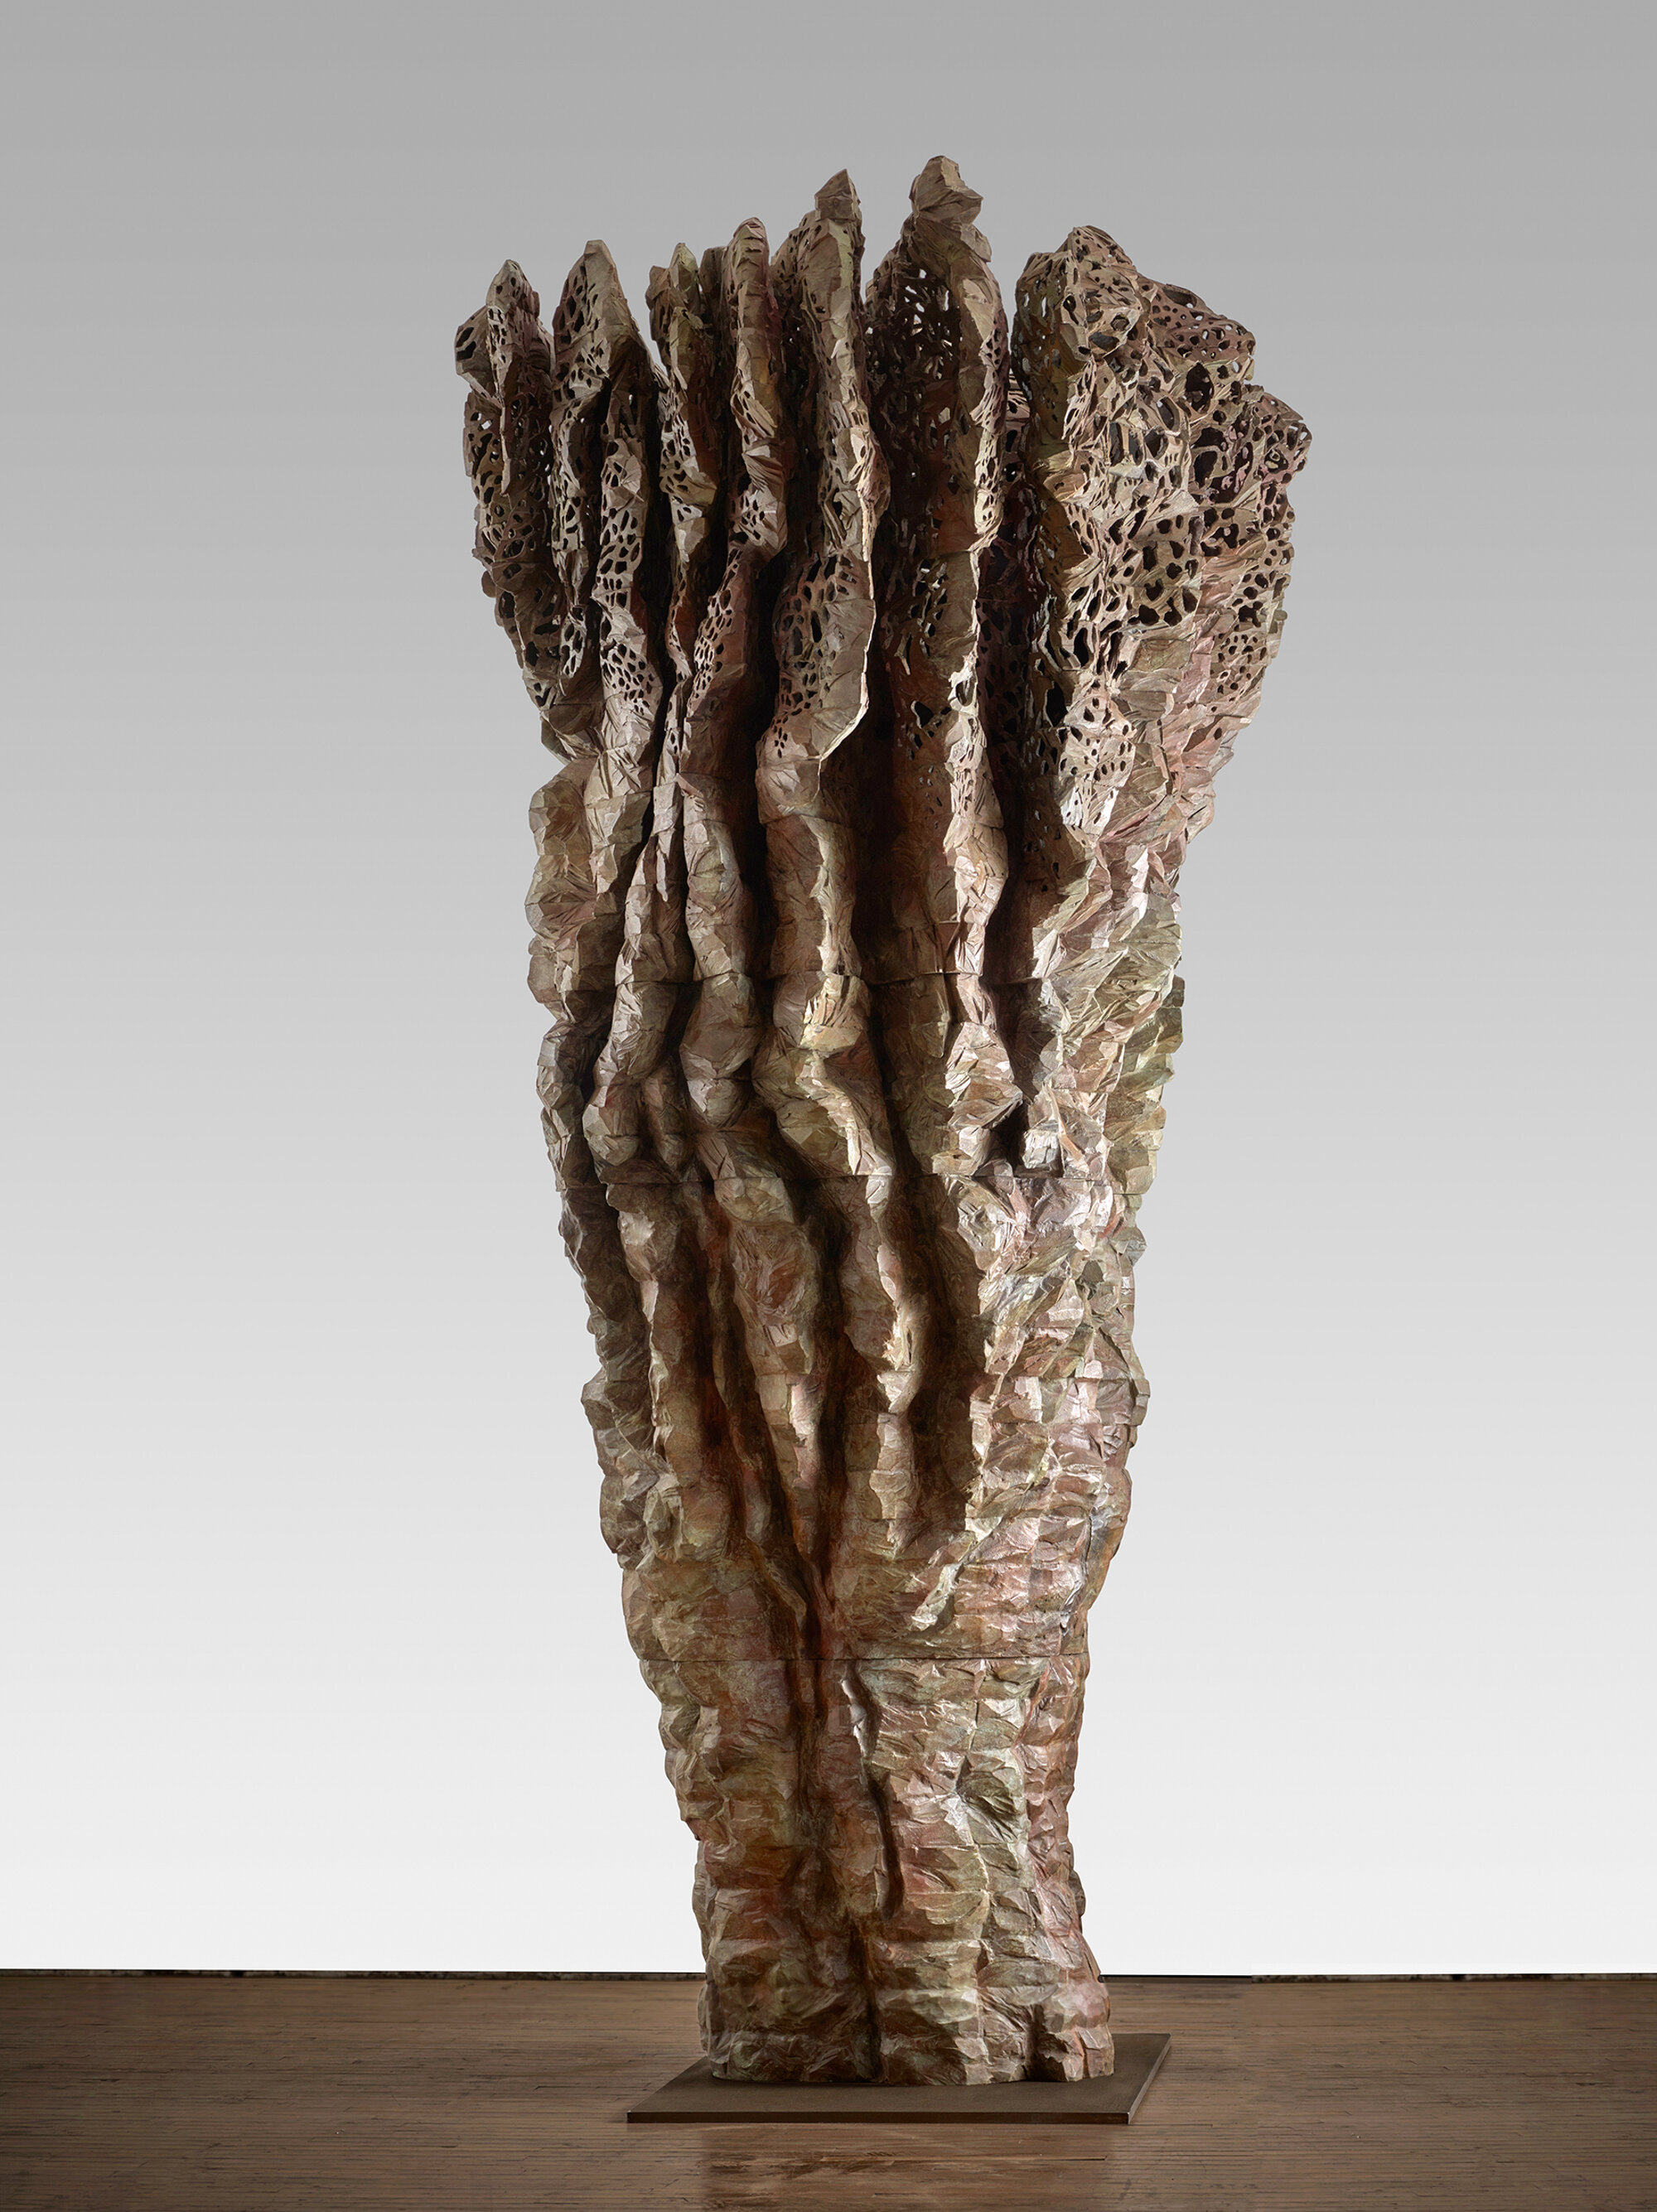       Z BOKU , 2018 Bronze 125.75 x 59.5 x 81 in. Edition of 3, with 1AP      MORE IMAGES   Galerie Lelong &amp; Co.  